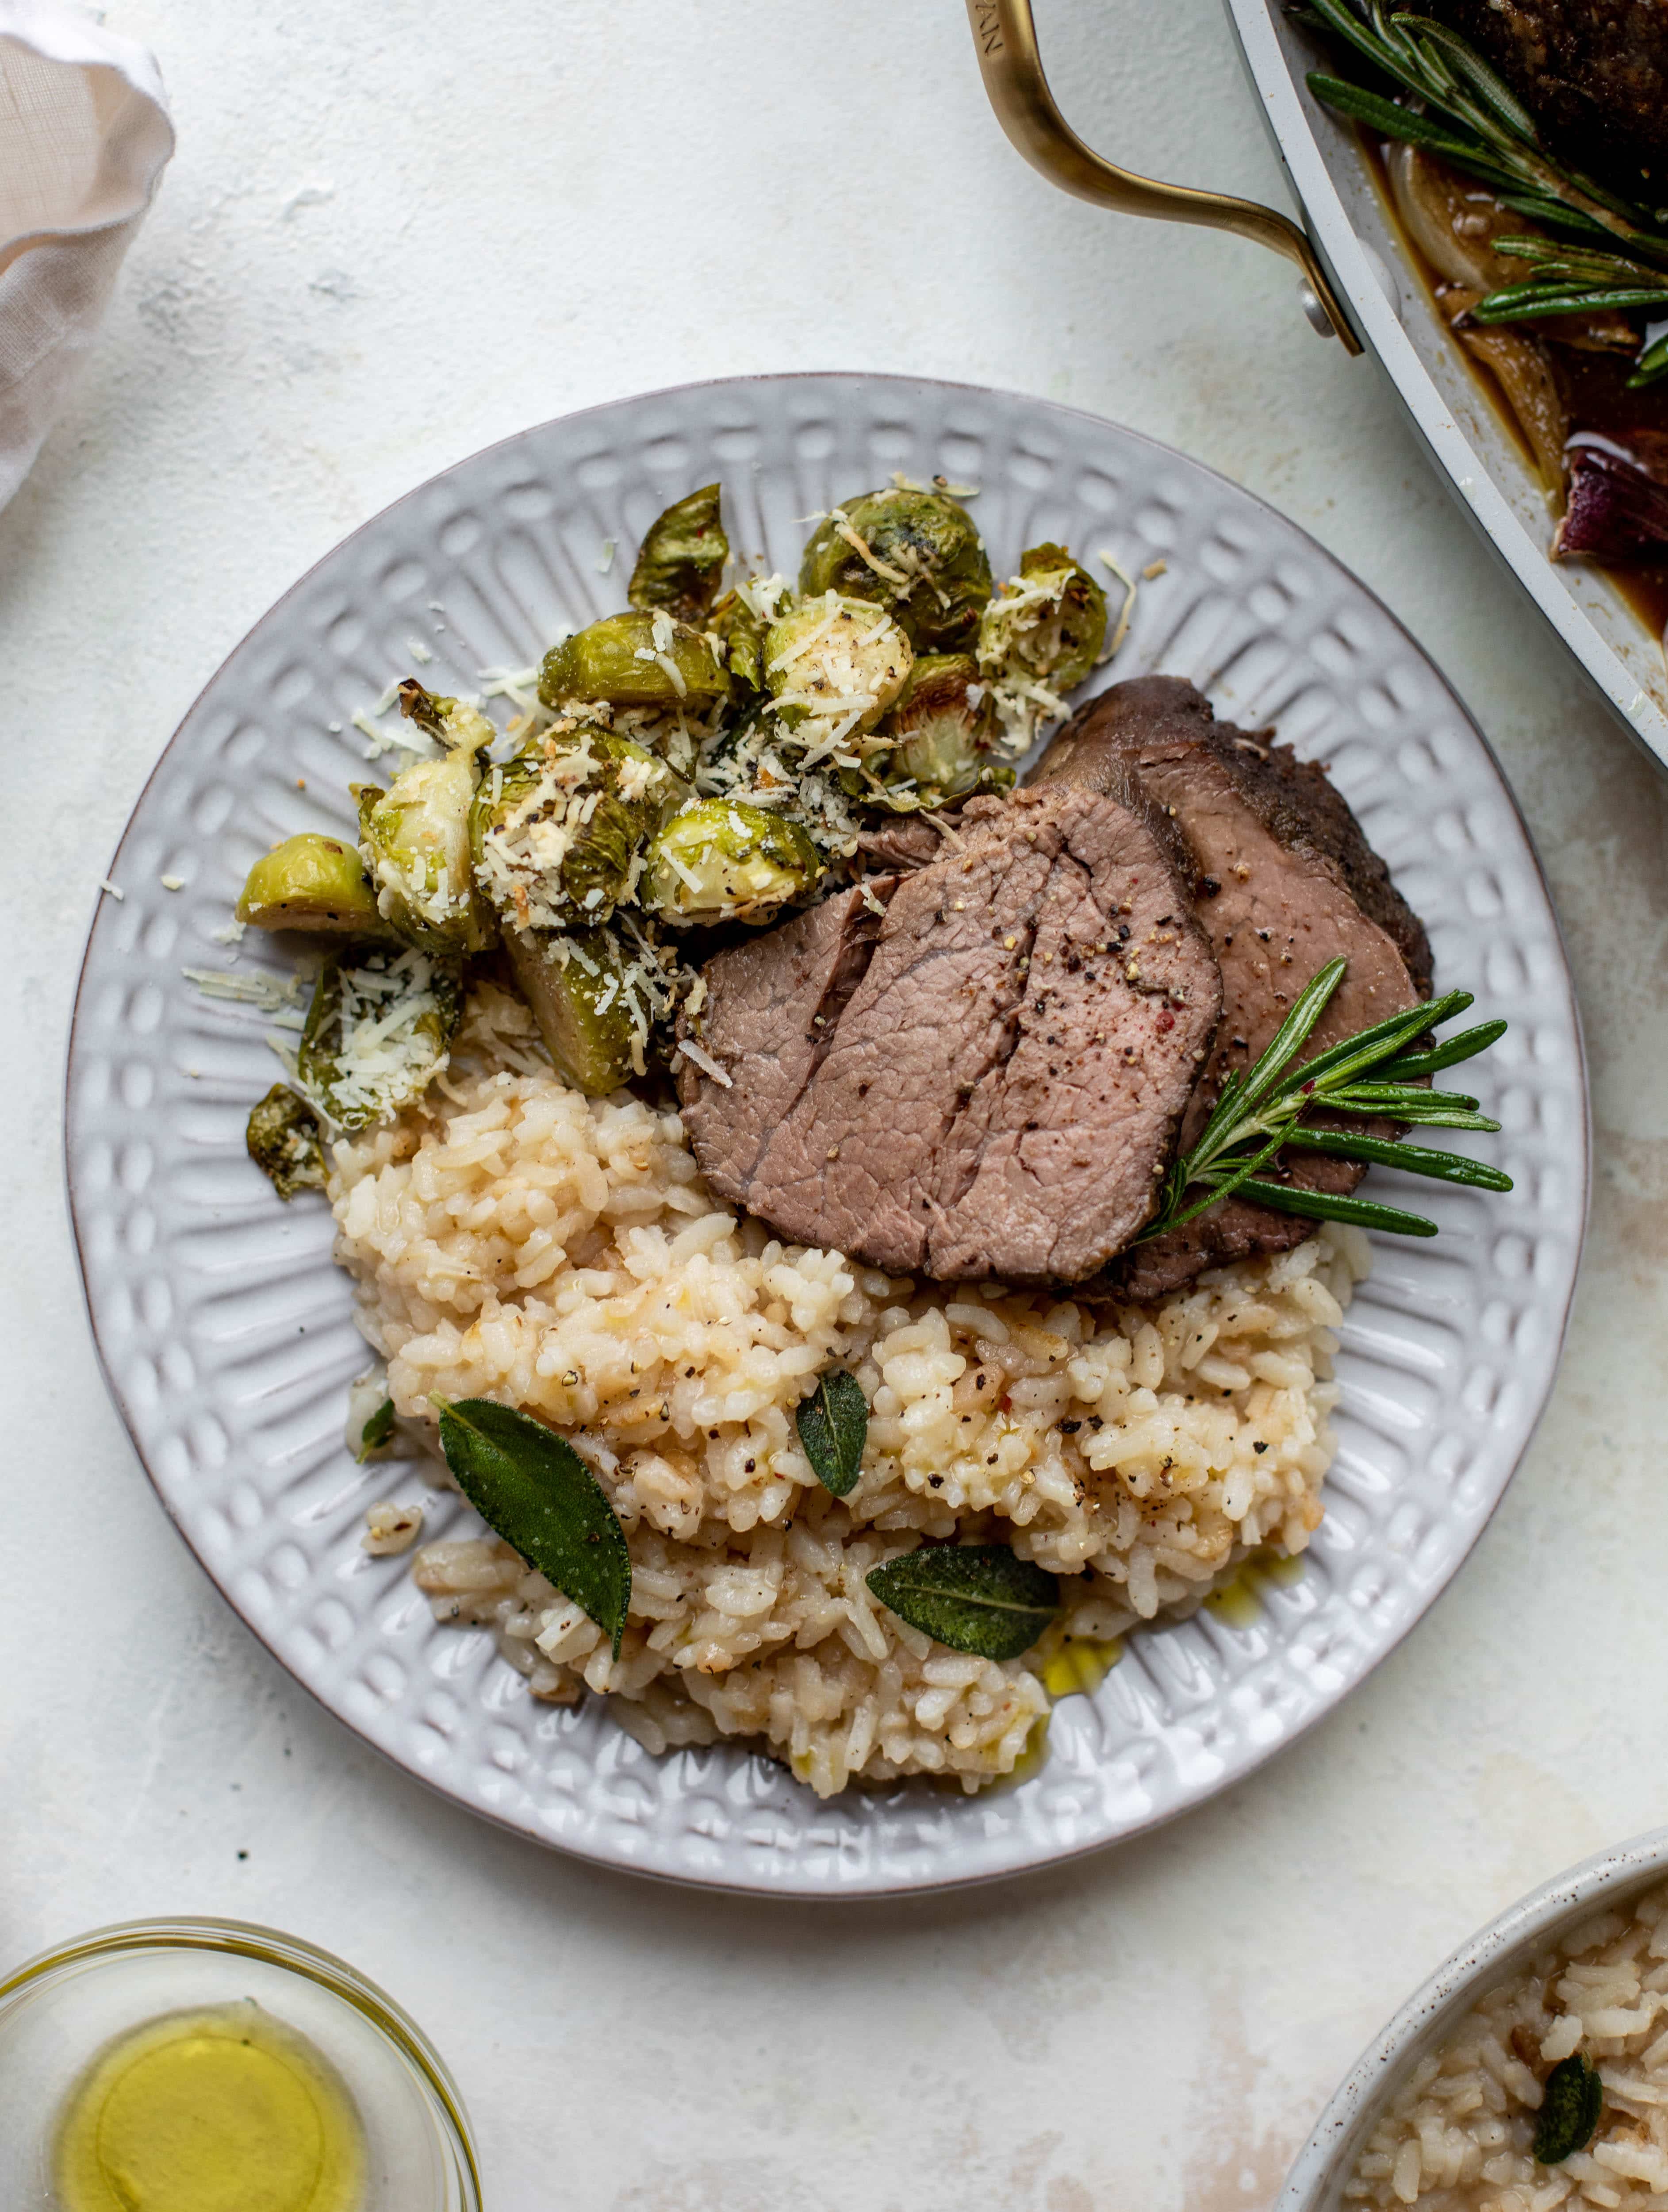 The ultimate special occasion meal! Espresso crusted filet paired with truffle sage risotto and cacio e pepe brussels. So much flavor - it's perfect for the holidays!